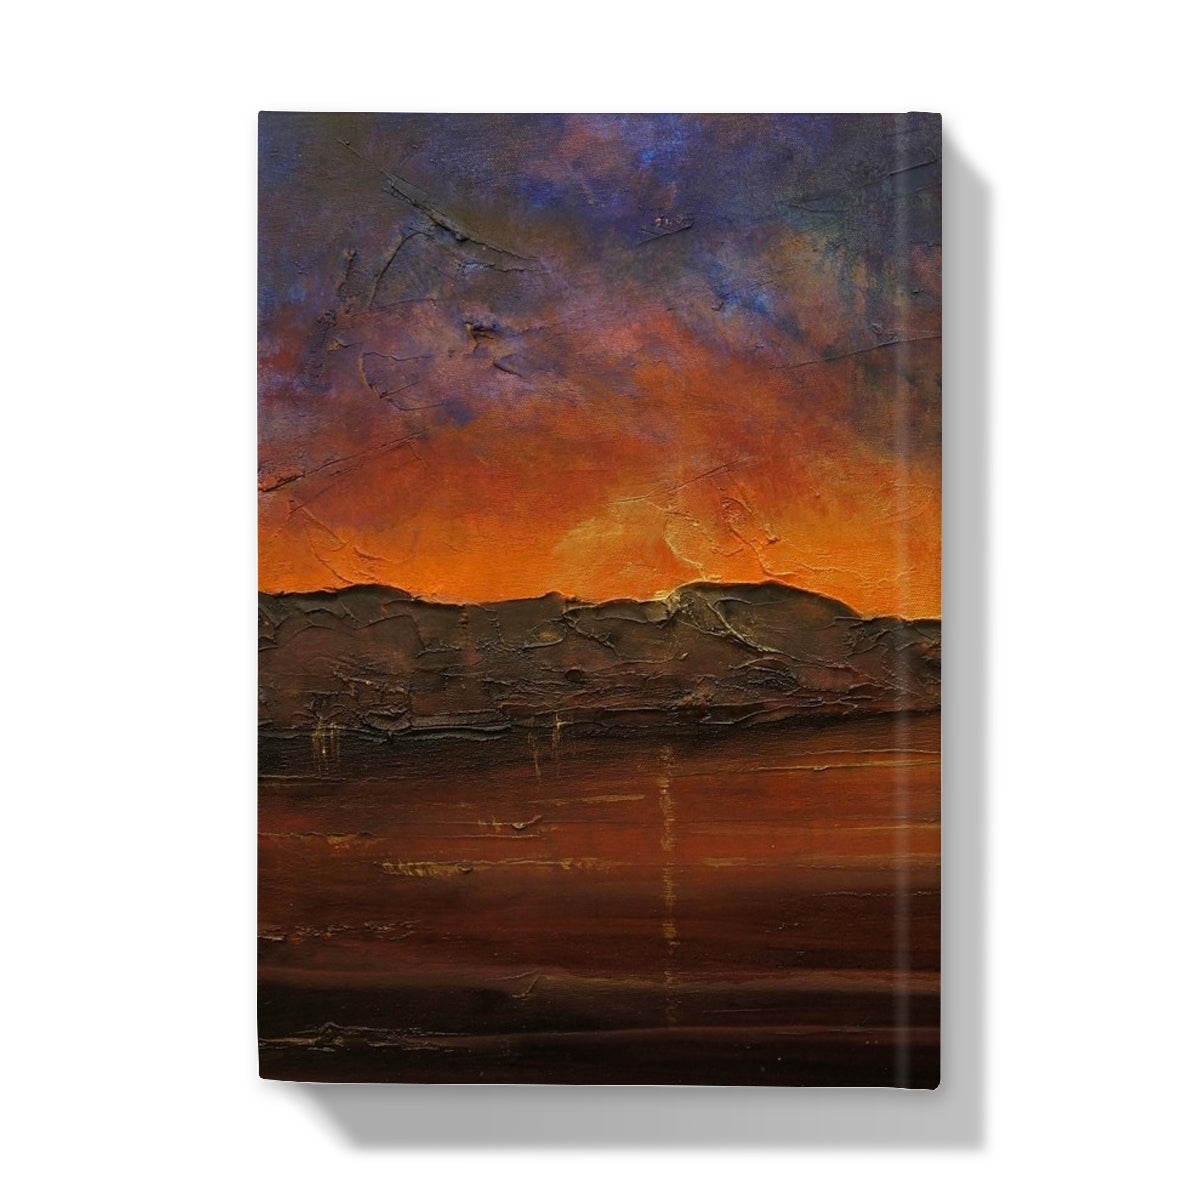 A Brooding Clyde Dusk Art Gifts Hardback Journal-Journals & Notebooks-River Clyde Art Gallery-Paintings, Prints, Homeware, Art Gifts From Scotland By Scottish Artist Kevin Hunter